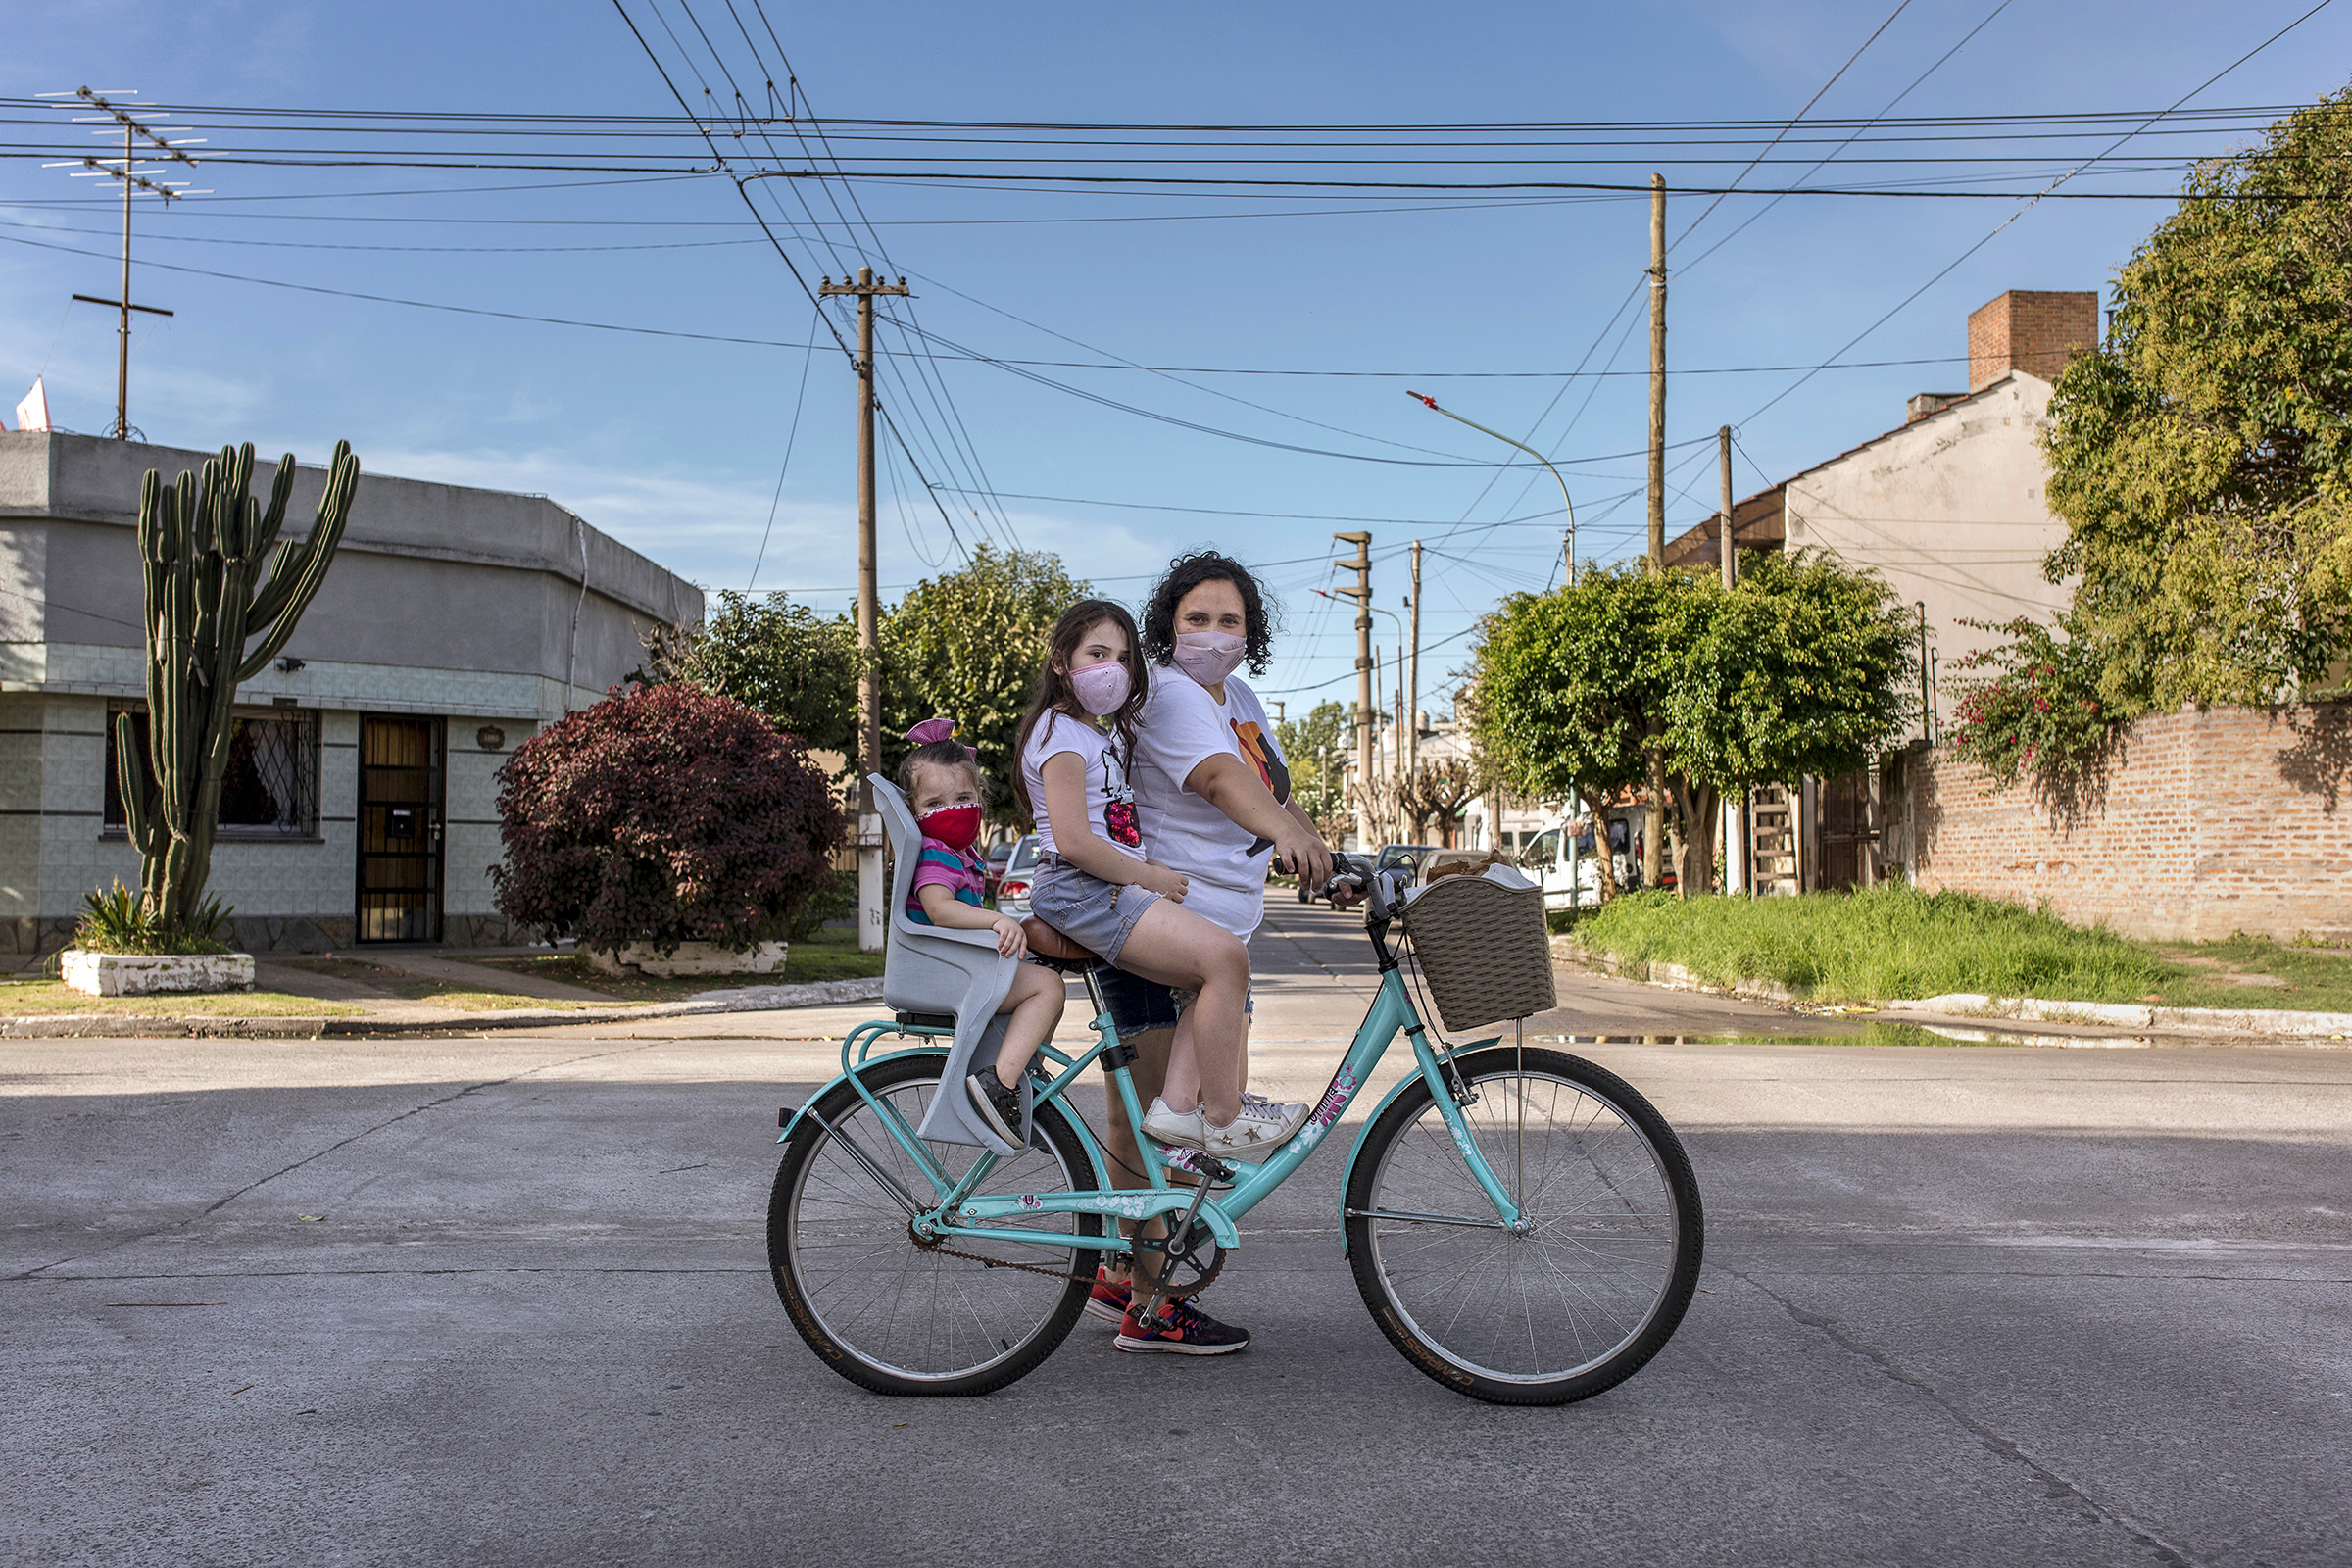 María Teresa Arzamendia stands for a portrait with her two daughters Leia and Catalina and her bicycle with pastries in El Palomar, Buenos Aires Province, on April 17. (Sarah Pabst for TIME)